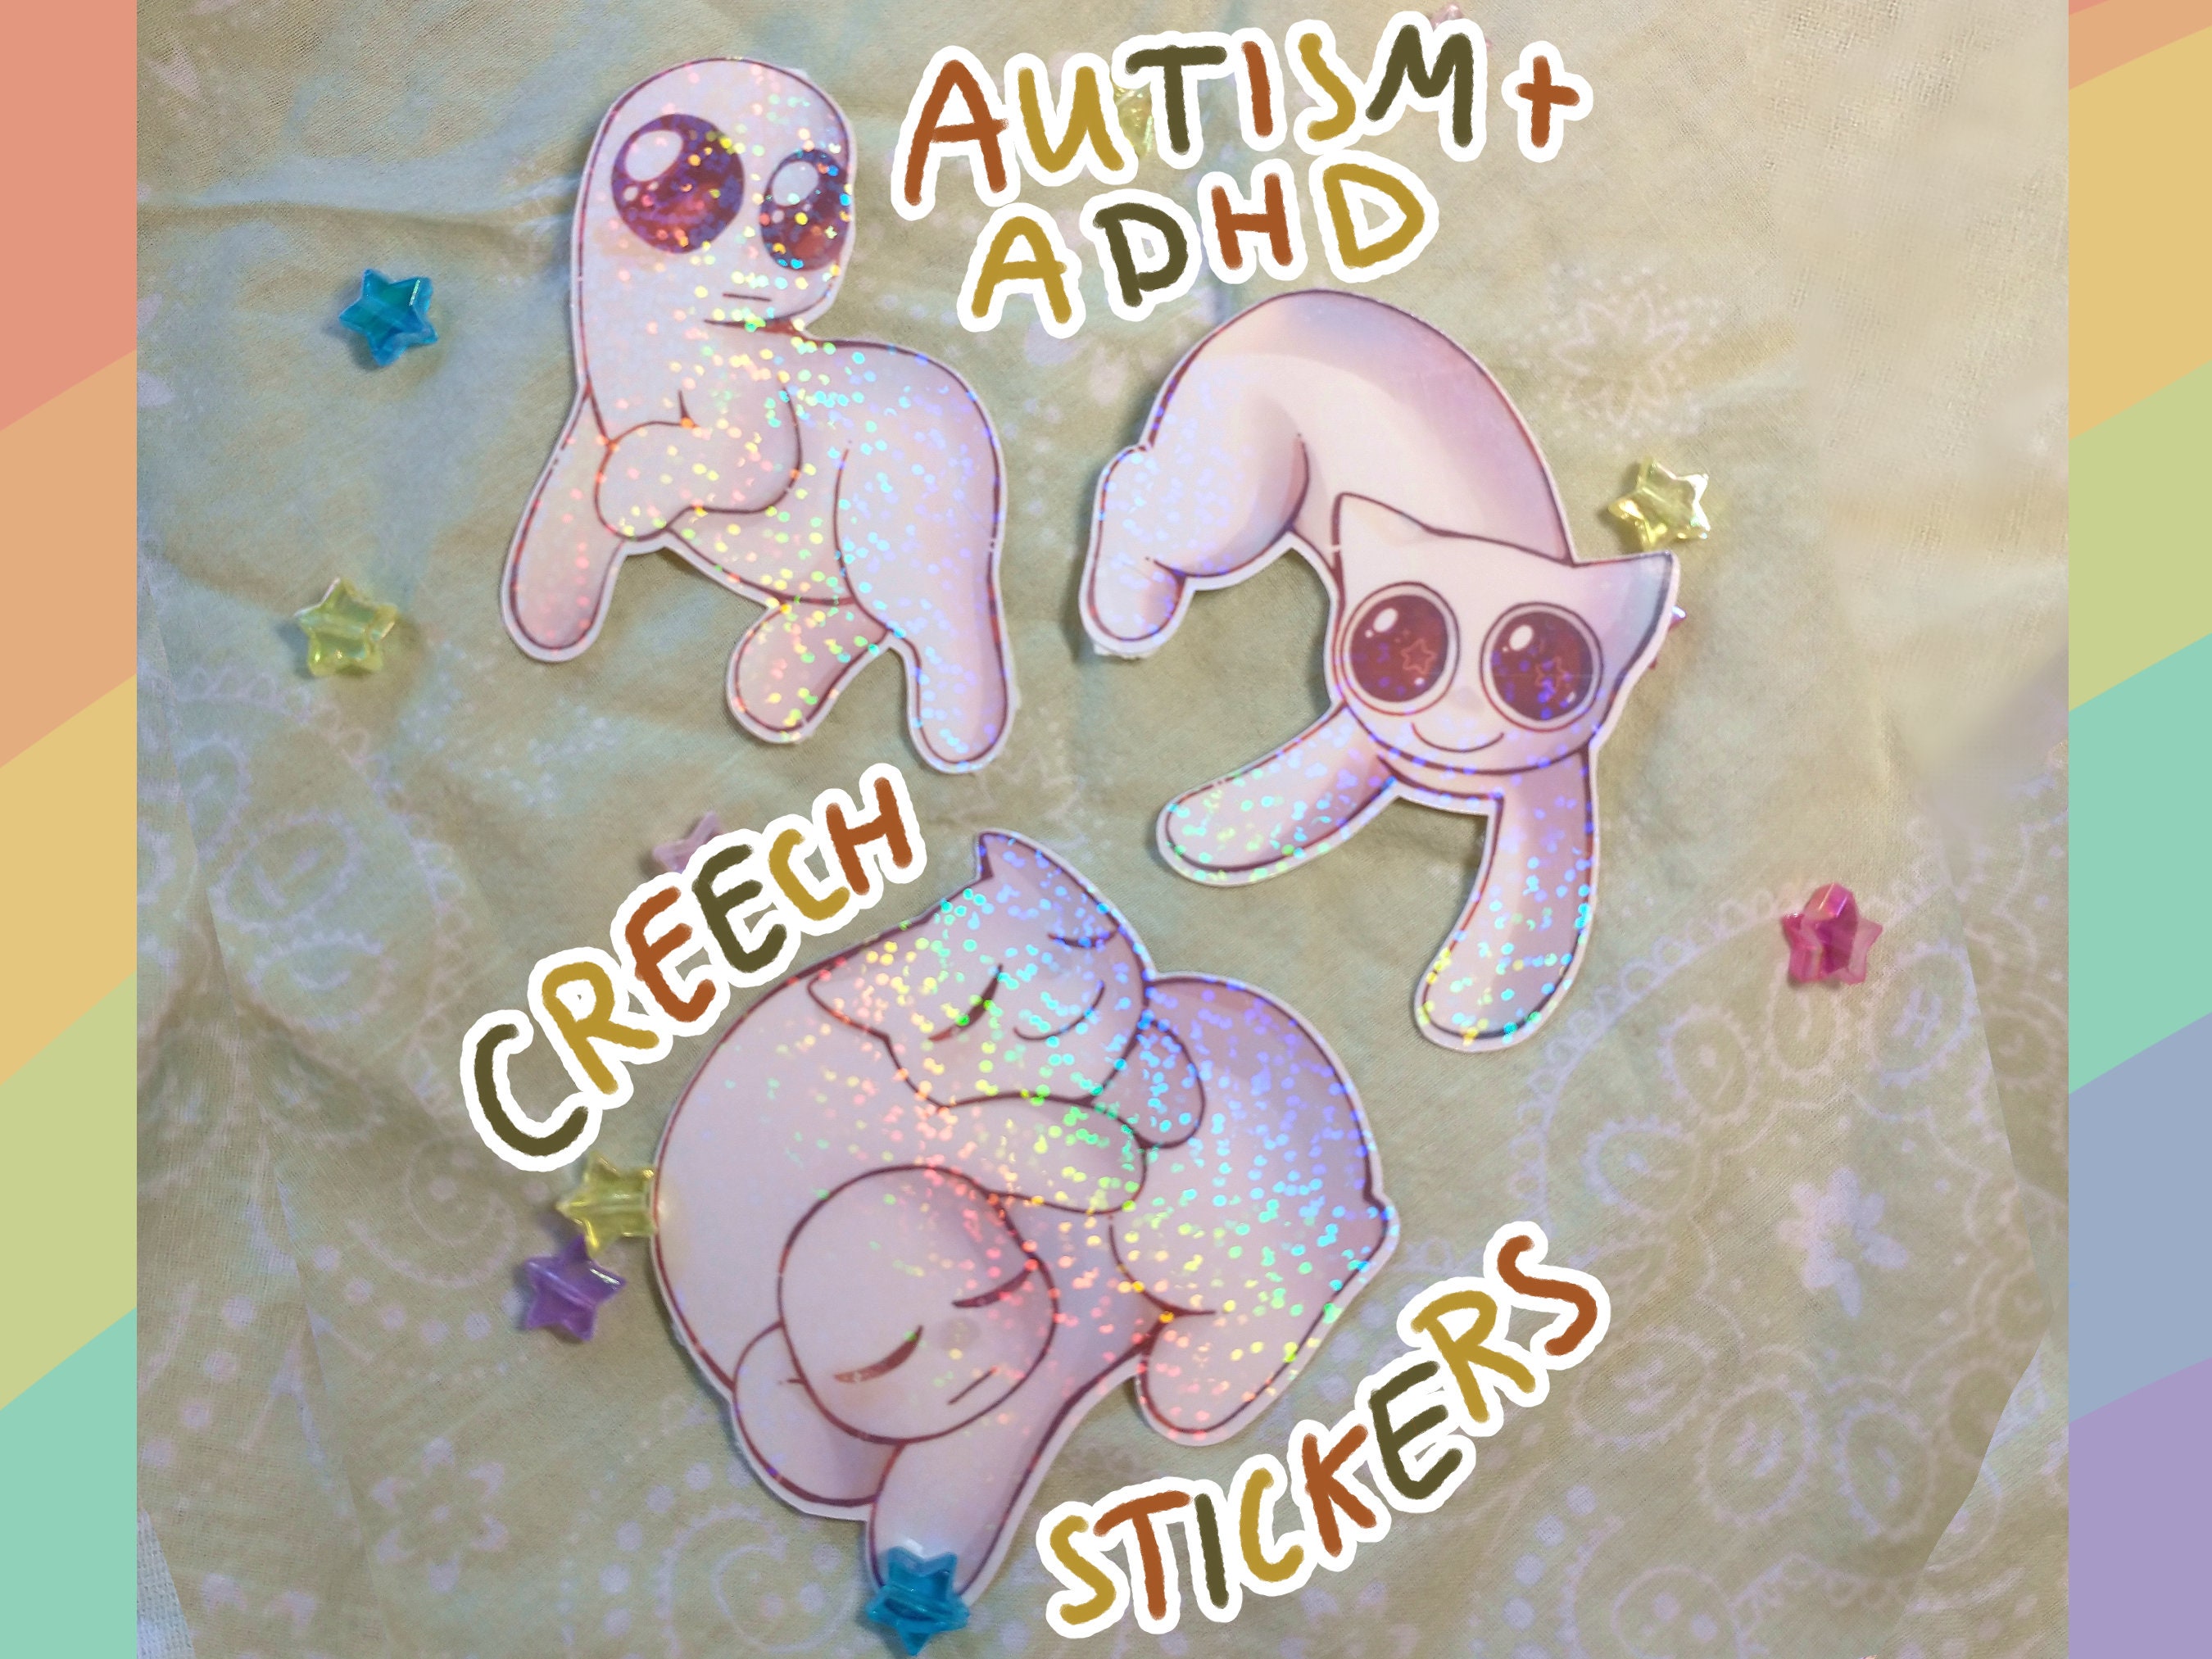 Autism Creature Stickers for Sale